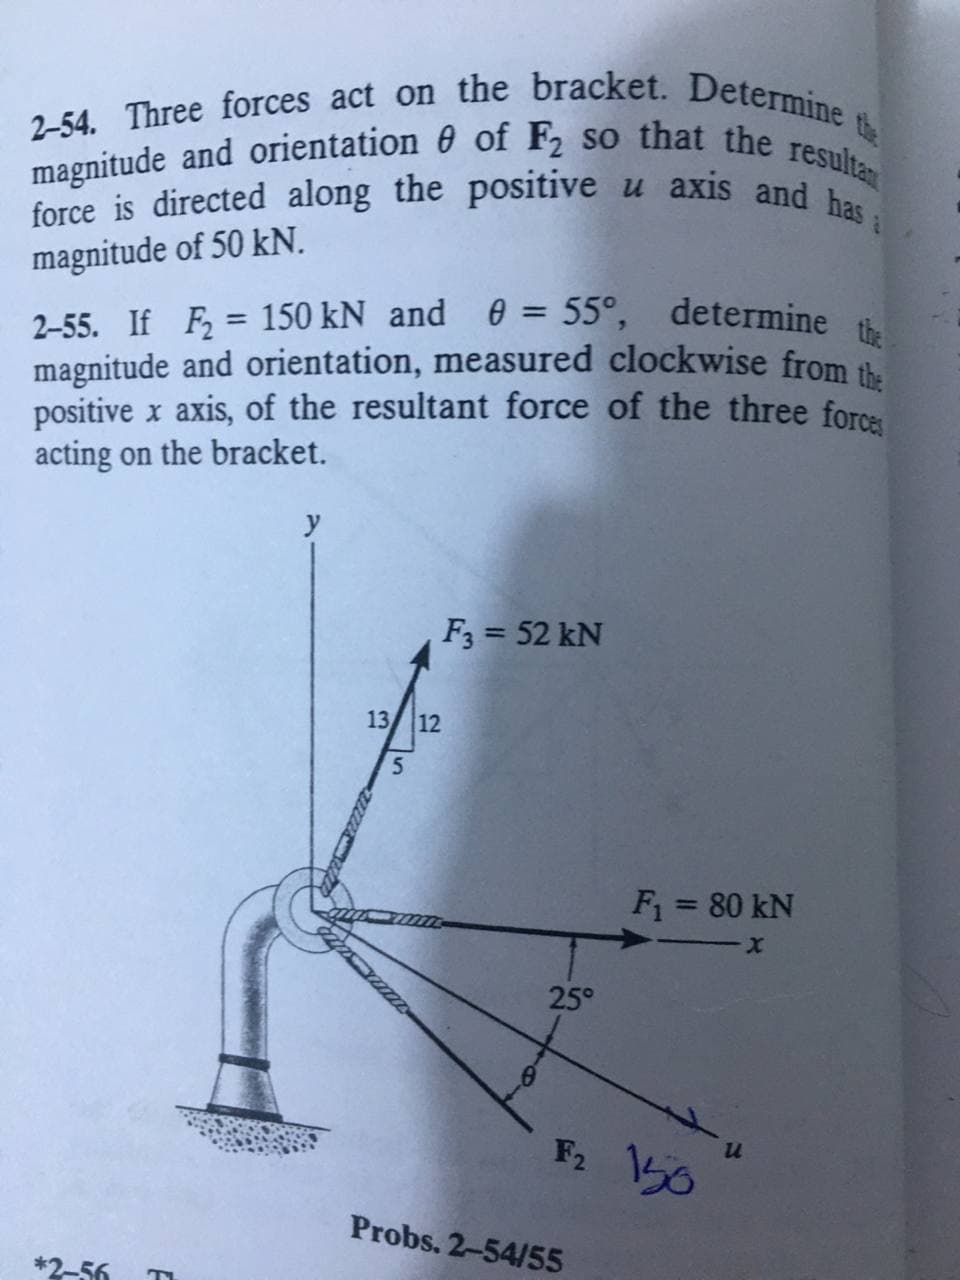 2-54. Three forces act on the bracket. Determine
magnitude and orientation 0 of F2 so that the resultan
force is directed along the positive u axis and has a
the
magnitude of 50 kN.
2-55. If F, = 150 kN and 0 = 55°, determine
magnitude and orientation, measured clockwise from
positive x axis, of the resultant force of the three forcs
acting on the bracket.
%3D
%3D
y
F3 = 52 kN
13/ 12
F = 80 kN
25°
F2 50
Probs. 2-54/55
*2-56
